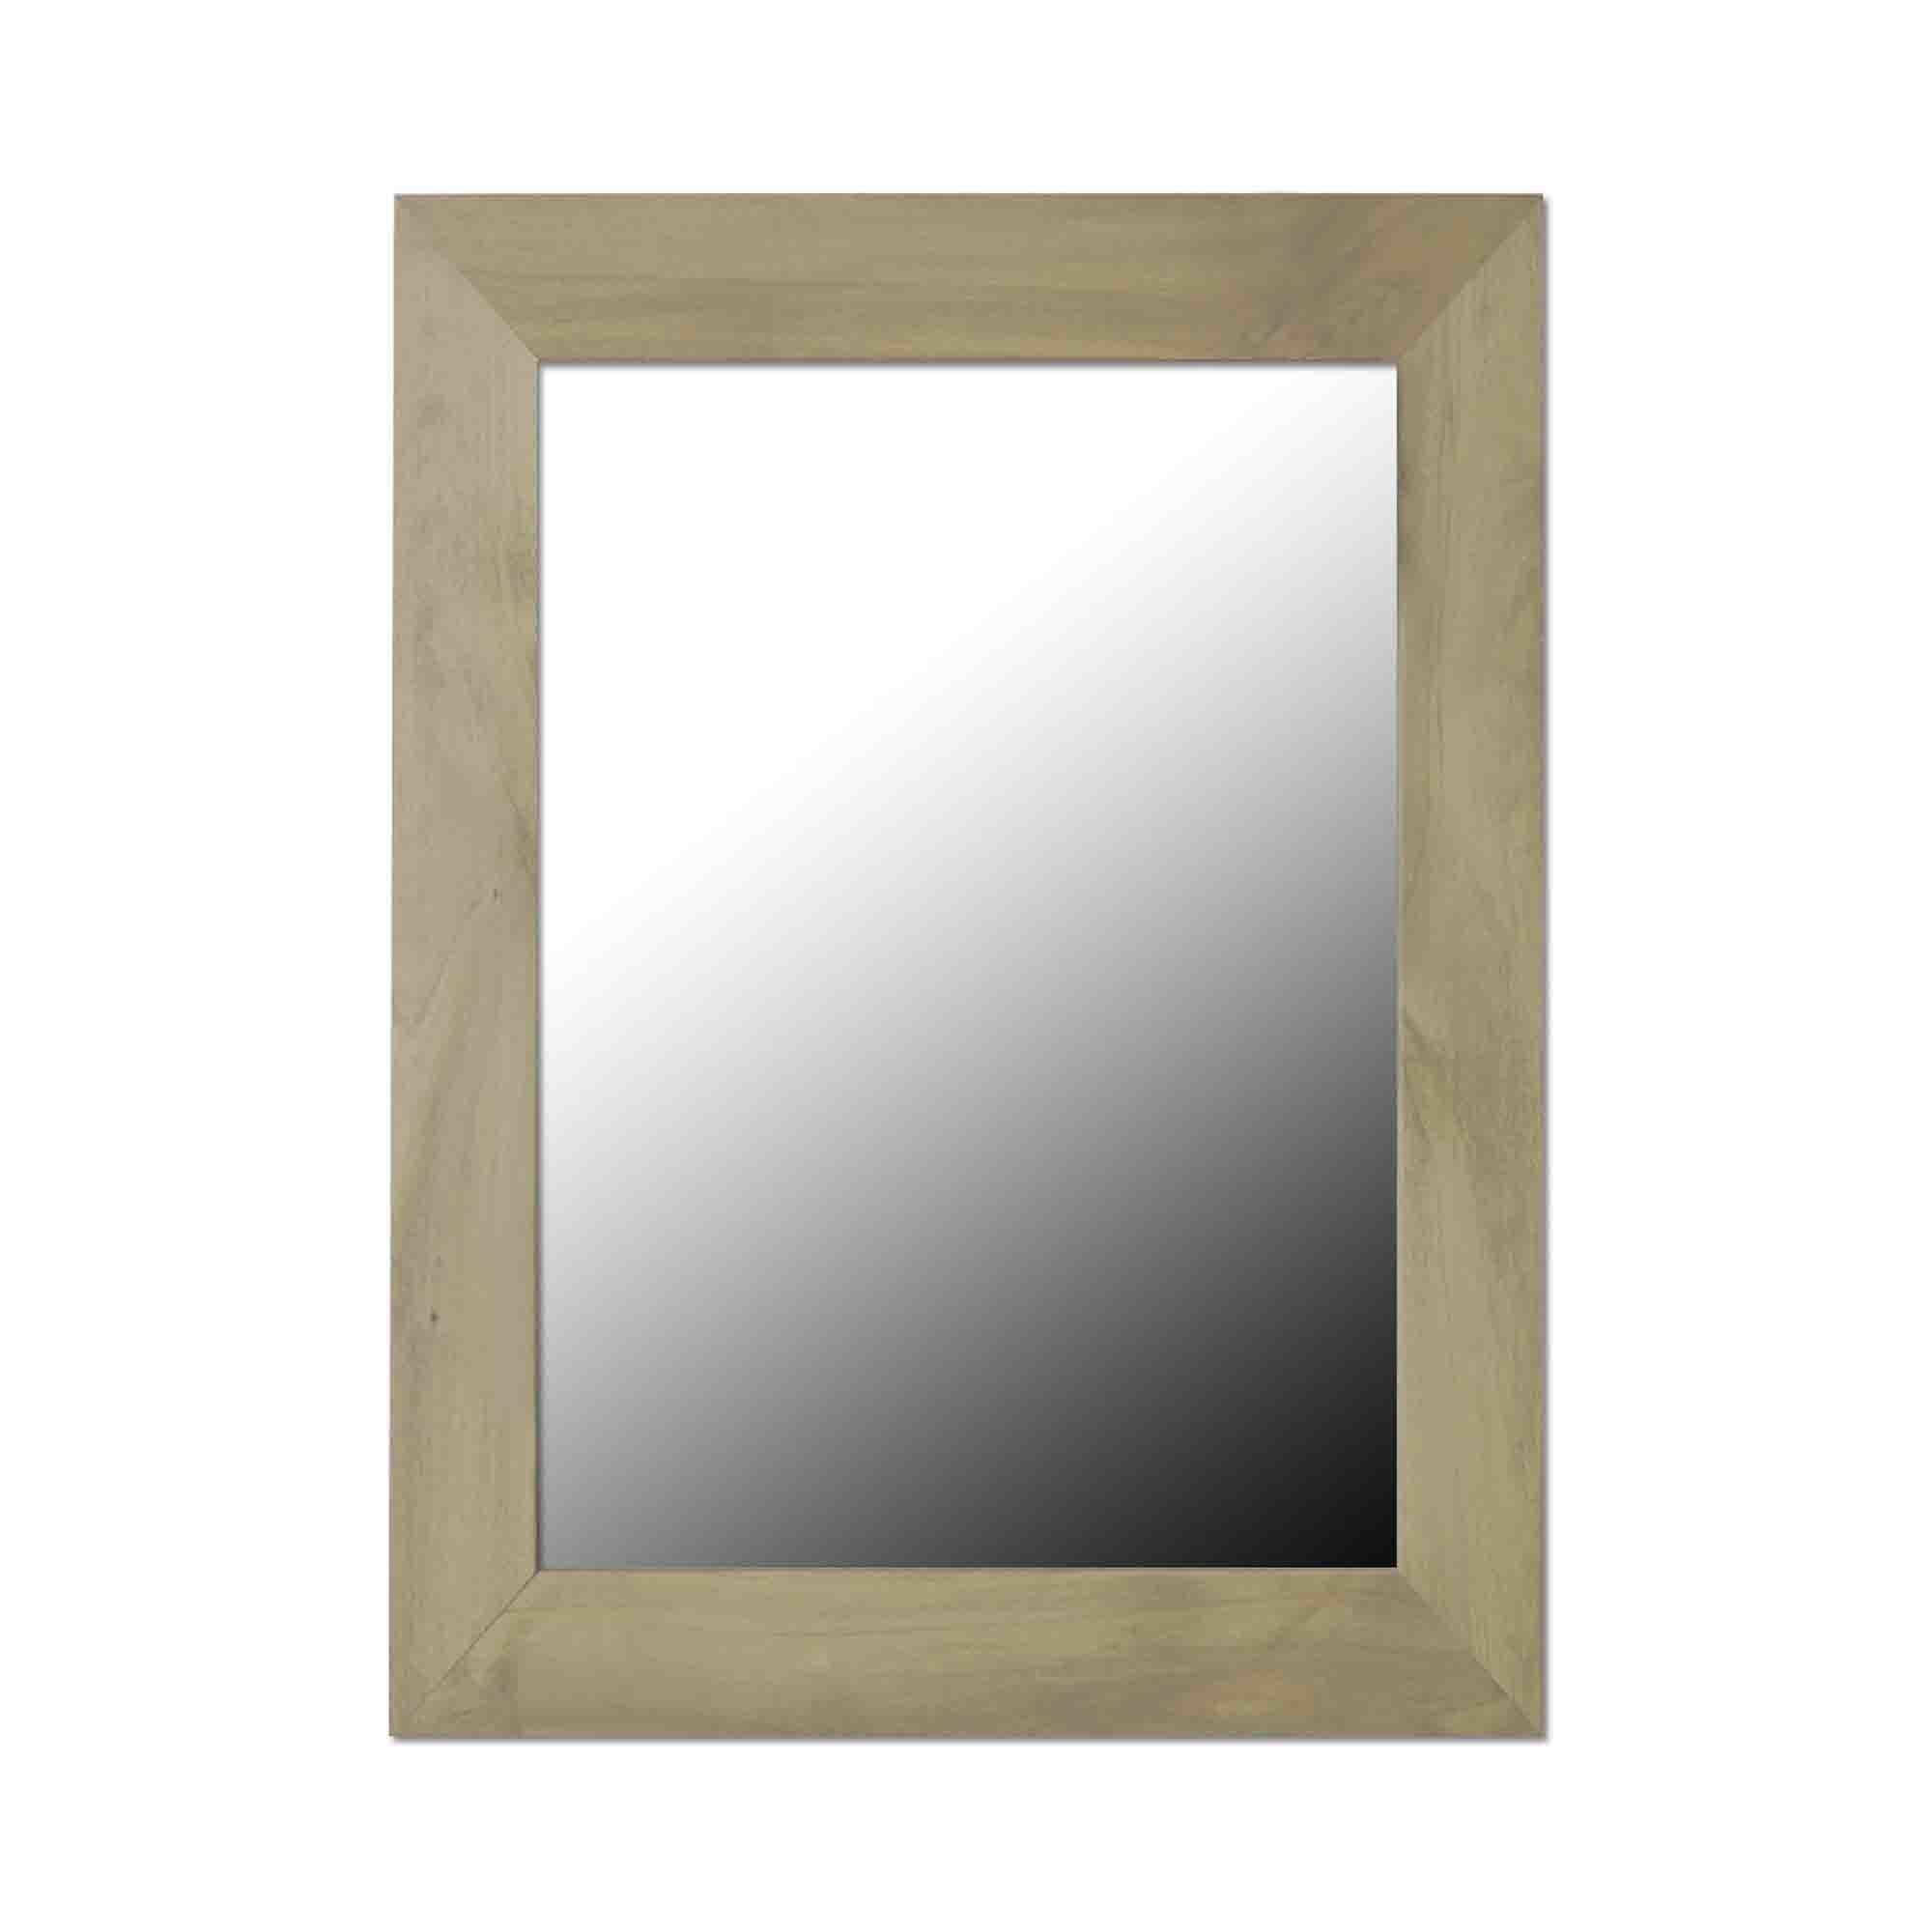 Home Basics Contemporary Rectangle Wall Mirror, Natural $5.00 EACH, CASE PACK OF 6